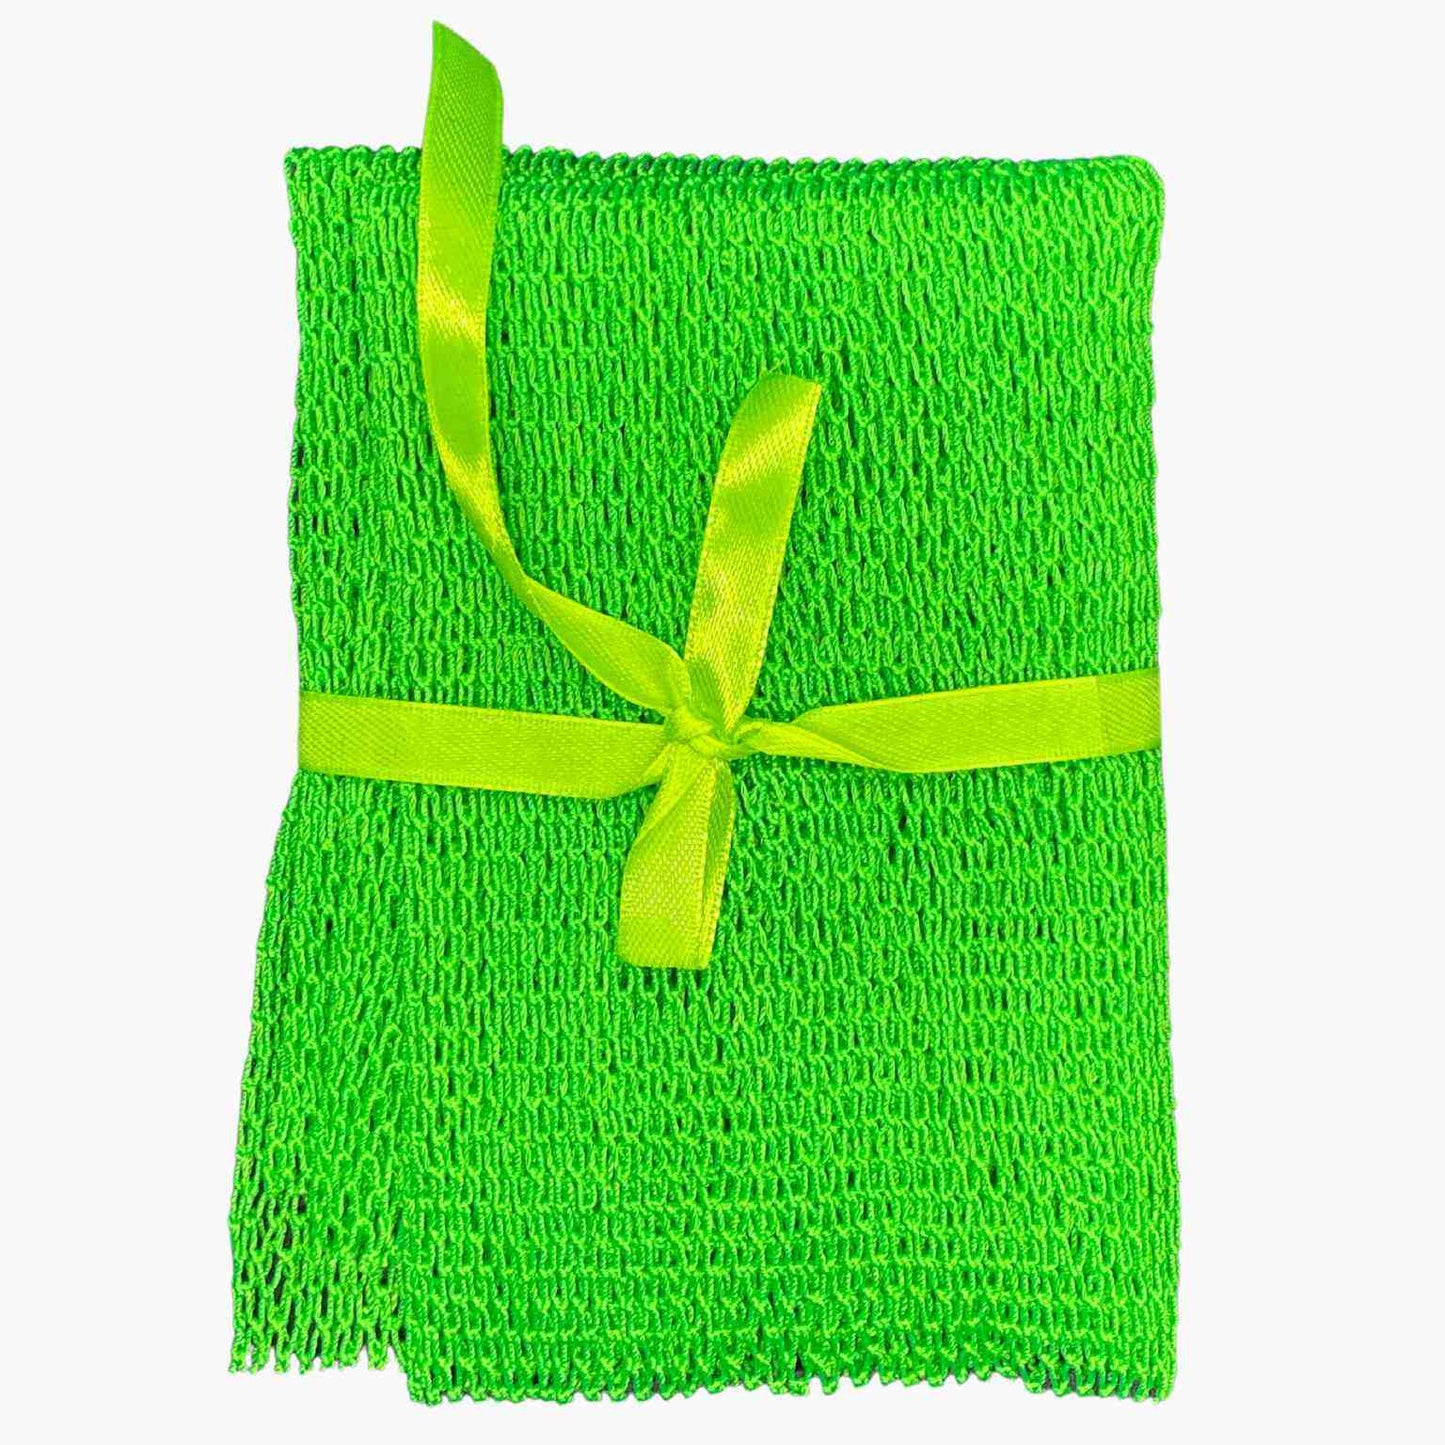 Flat image and top view of a lime green shower exfoliation net wrapped in a lime green bow - Sincerely Sanguine